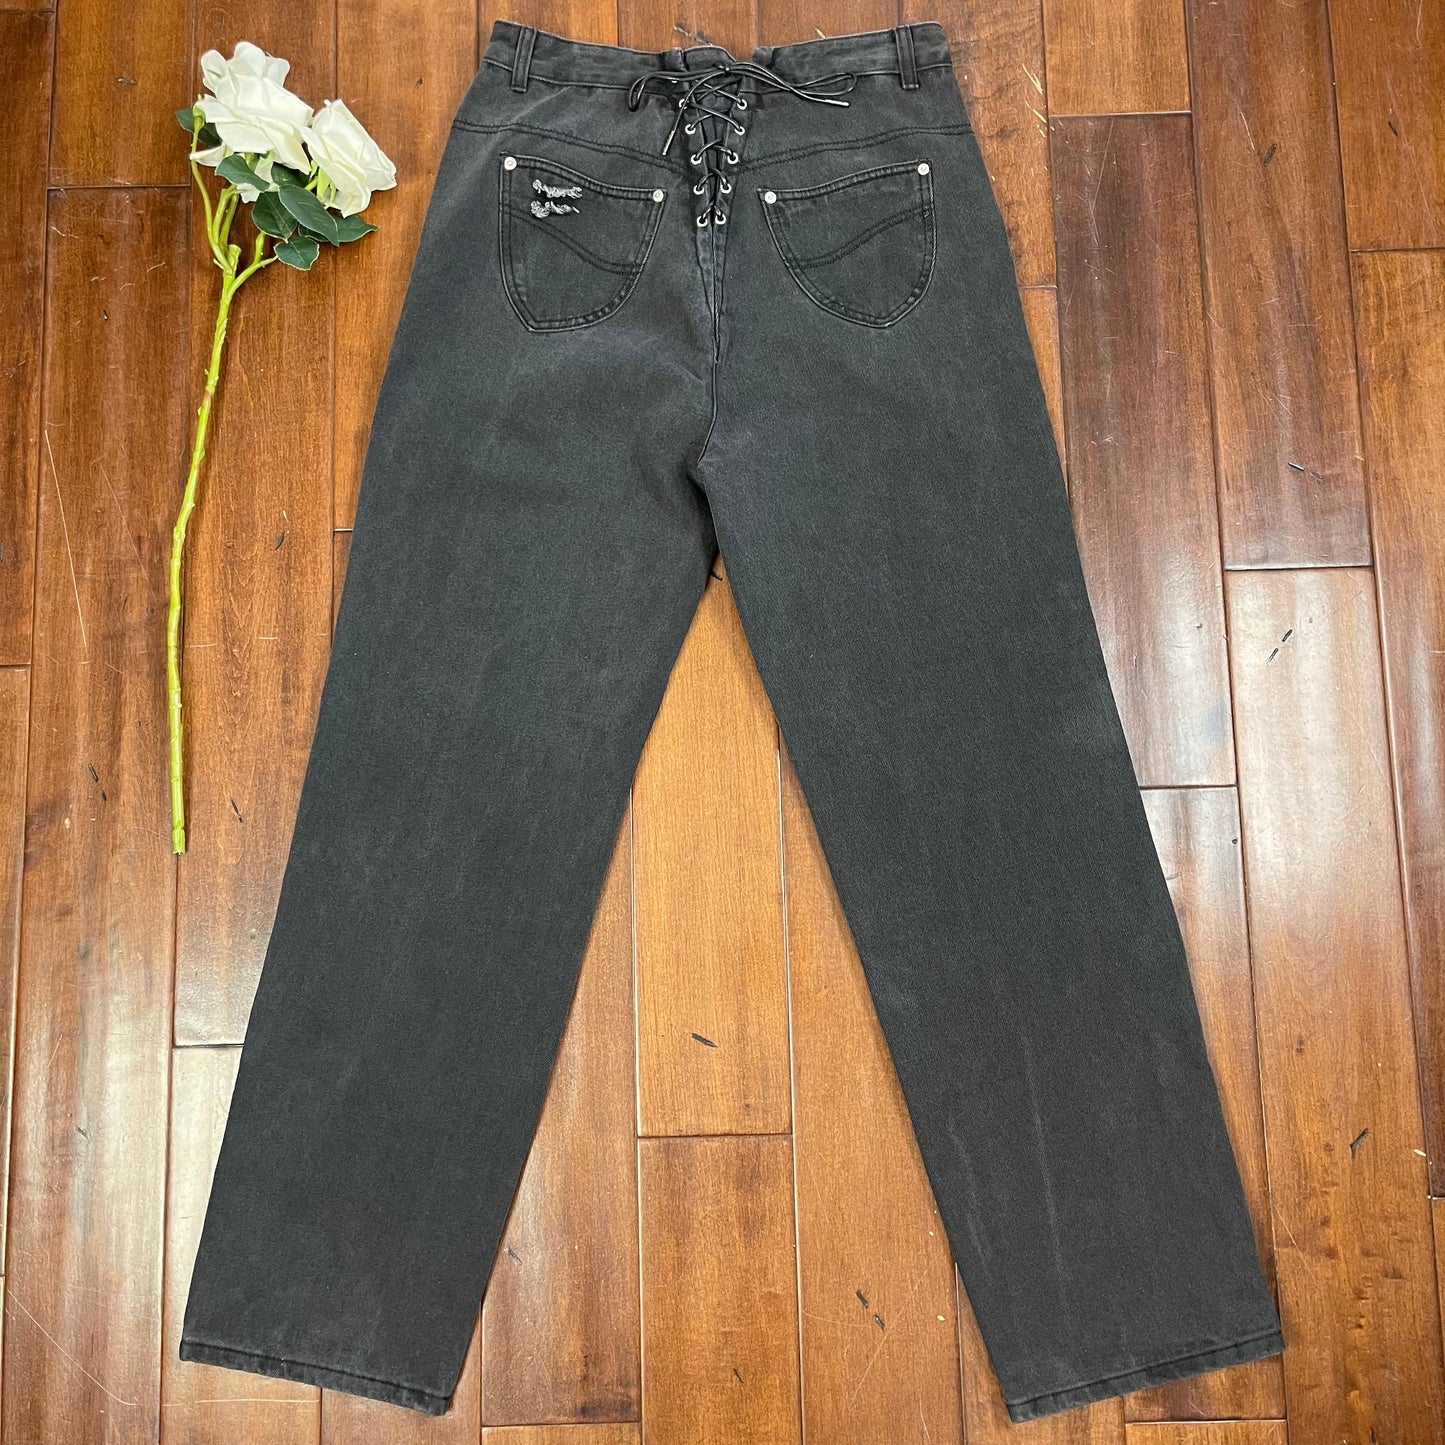 THRIFTED BLACK HIGH WAISTED JEANS